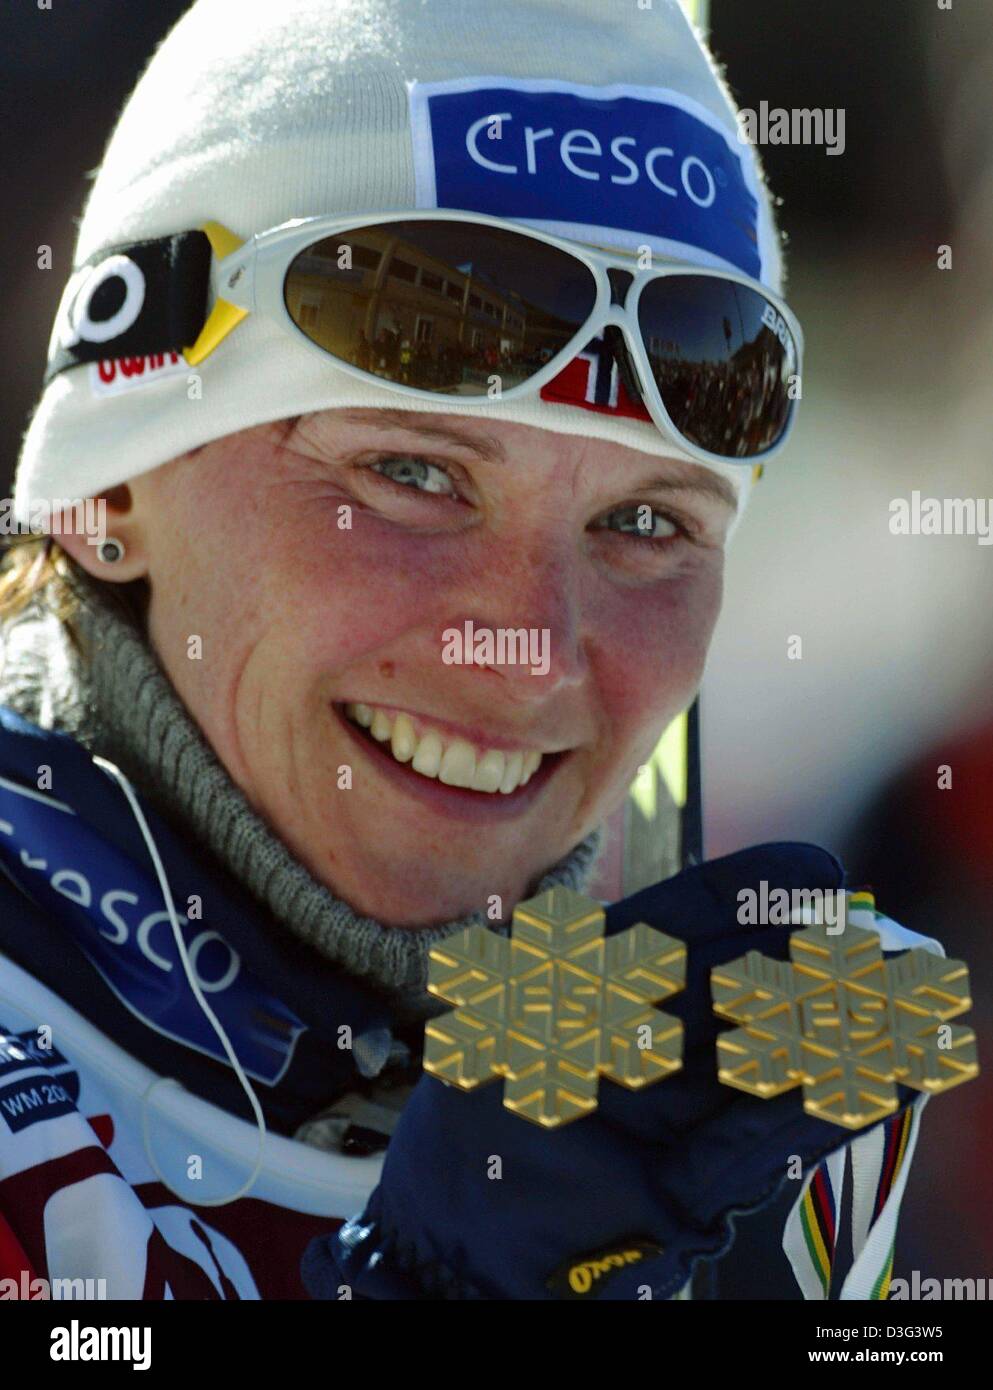 (dpa) - Norwegian Bente Skari shows her snow flake shaped gold medals after winning the 10 kilometres classic style race for women at the nordic skiing world championships in Tesero, Italy, 20 February 2003. Bente Skari has won her first gold medal in the 15 kilomentres classic style race. Stock Photo